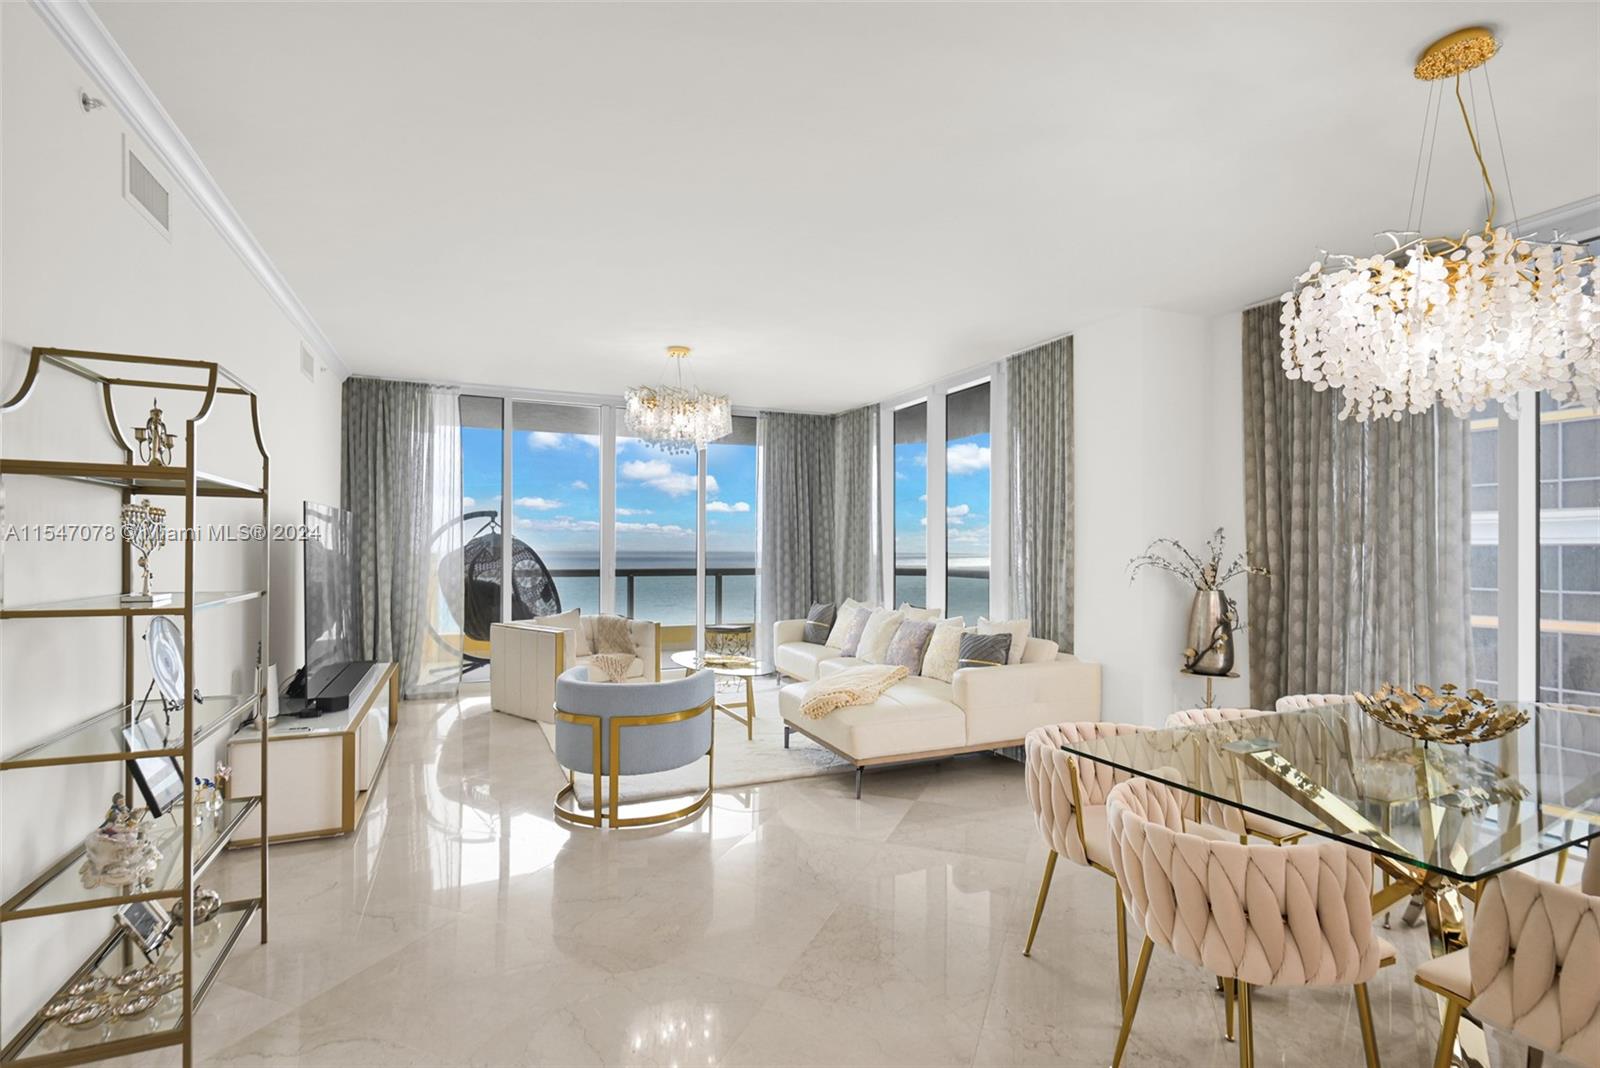 Welcome home to this magnificent luxury residence at Acqualina residences in Sunny Isles. Panoramic southeastern ocean and western views, encompassing the Intracoastal, bay, and Miami skyline, await you. This spacious 4-bedroom, 4-bathroom home spans 2,736 square feet and features a private foyer. Unit is remodeled with high-end finishes, custom-made closets, and top-of-the-line appliances throughout, this residence exudes luxury. Enjoy glorious panoramic sunrise and sunset views from two terraces. Amenities include a luxurious resort-style spa, four pools, a fitness center, three restaurants, beach service, and 24-hour concierge.